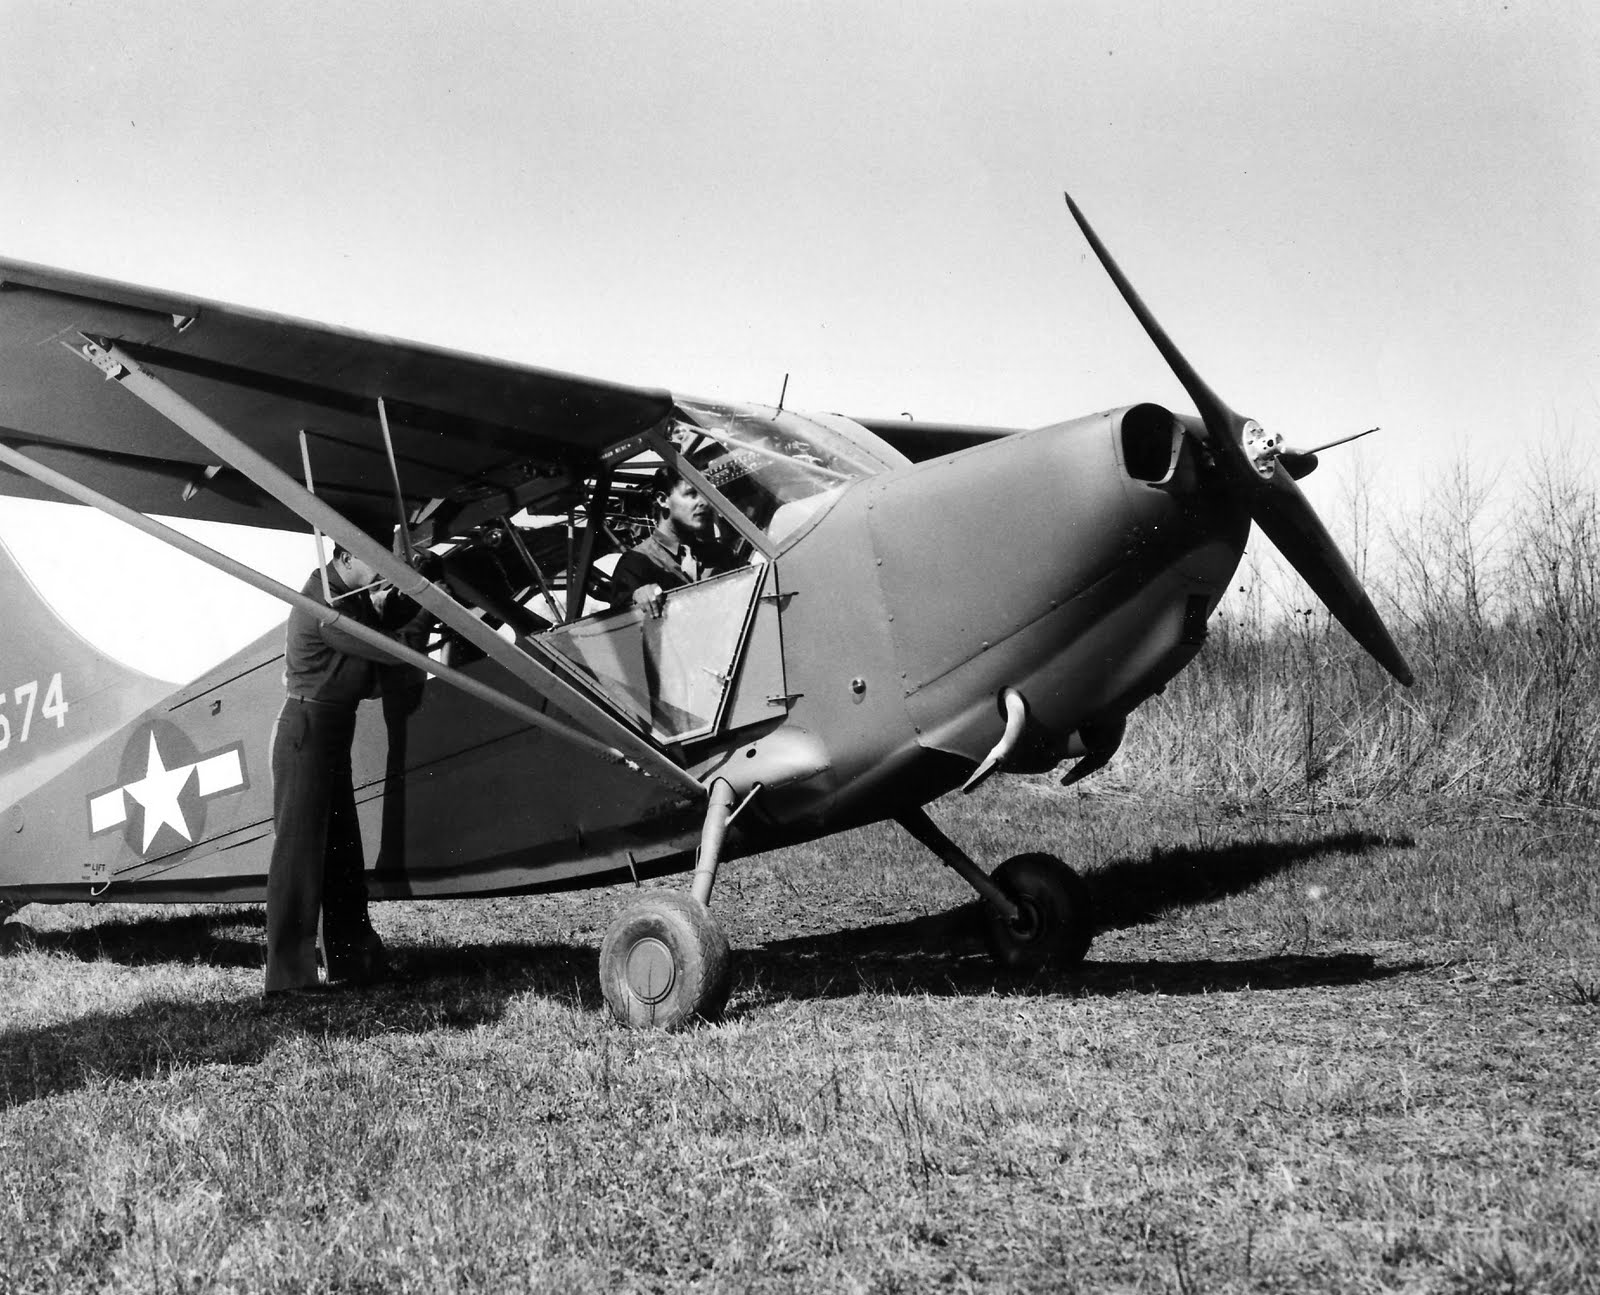 Modified from the Stinson L-5 Sentinel, the prototype L-5B air ambulance is shown during a manufacturer’s demonstration, 1944. Photo 3 of 3.